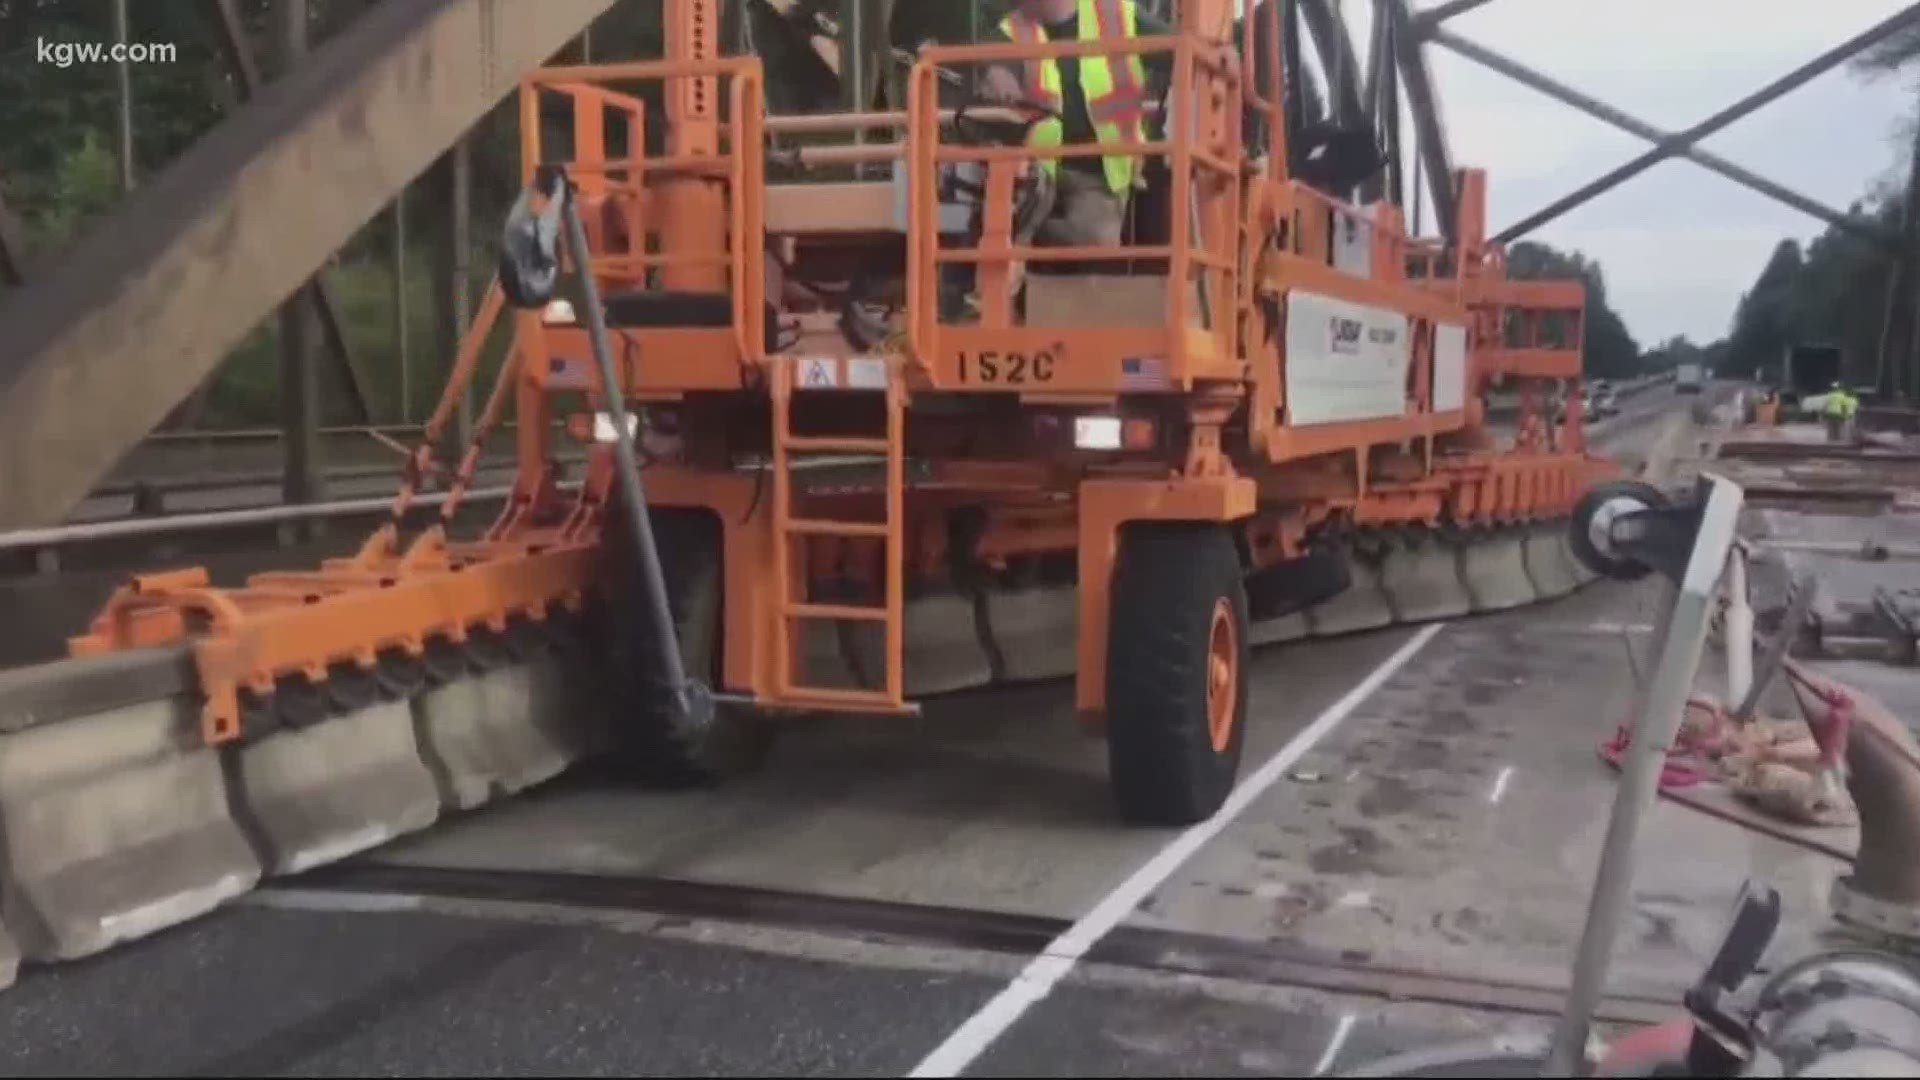 While the northbound lanes of I-5 are closed on the Interstate Bridge for 8 days, a movable zipper merge barrier will help control traffic in the southbound lanes.